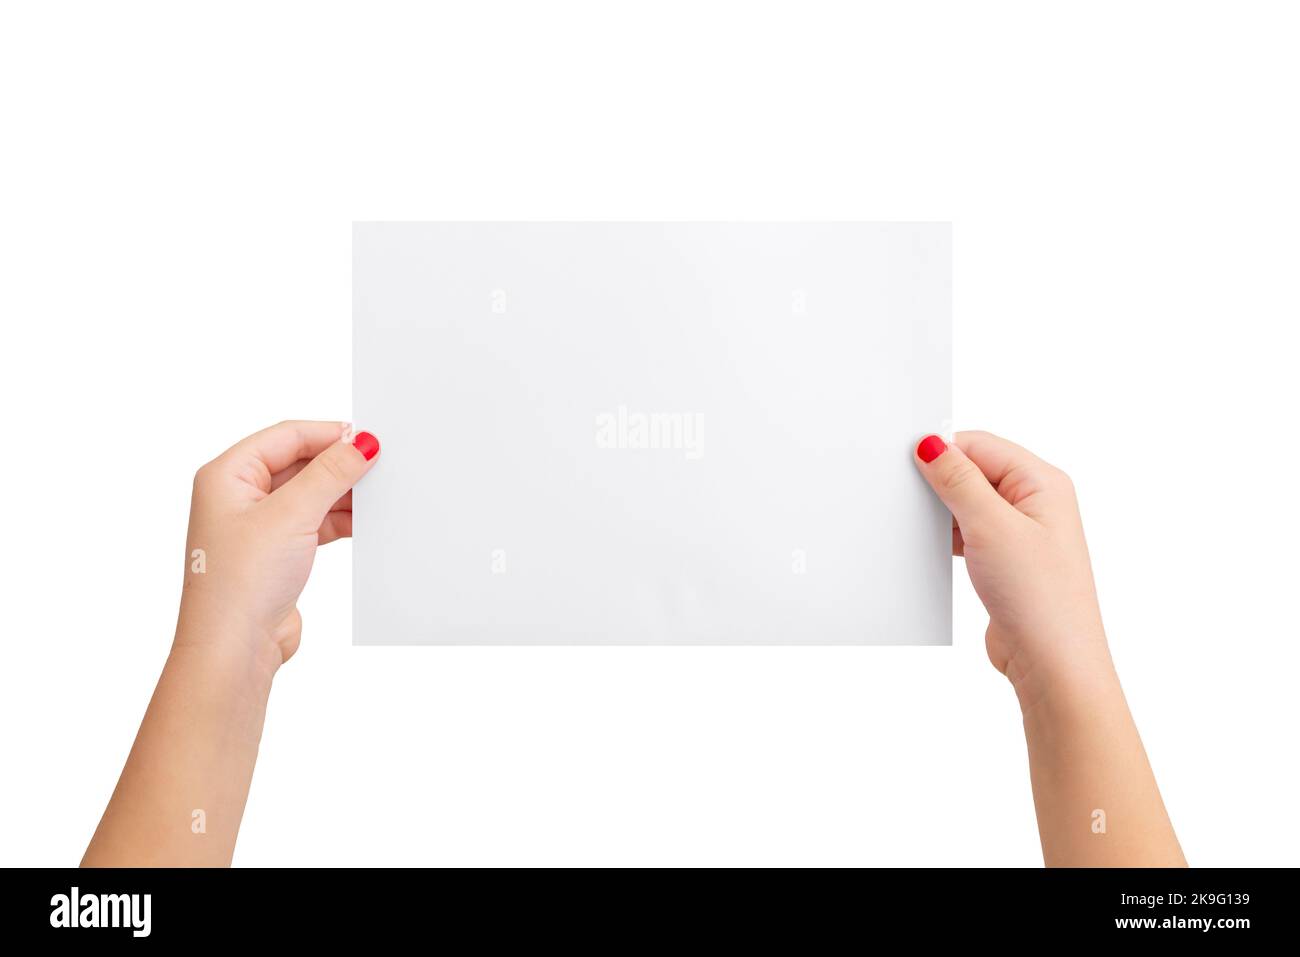 Girl's hands hold a blank paper in a horizontal position. Isolated background in white. Clean paper for copy presentation Stock Photo